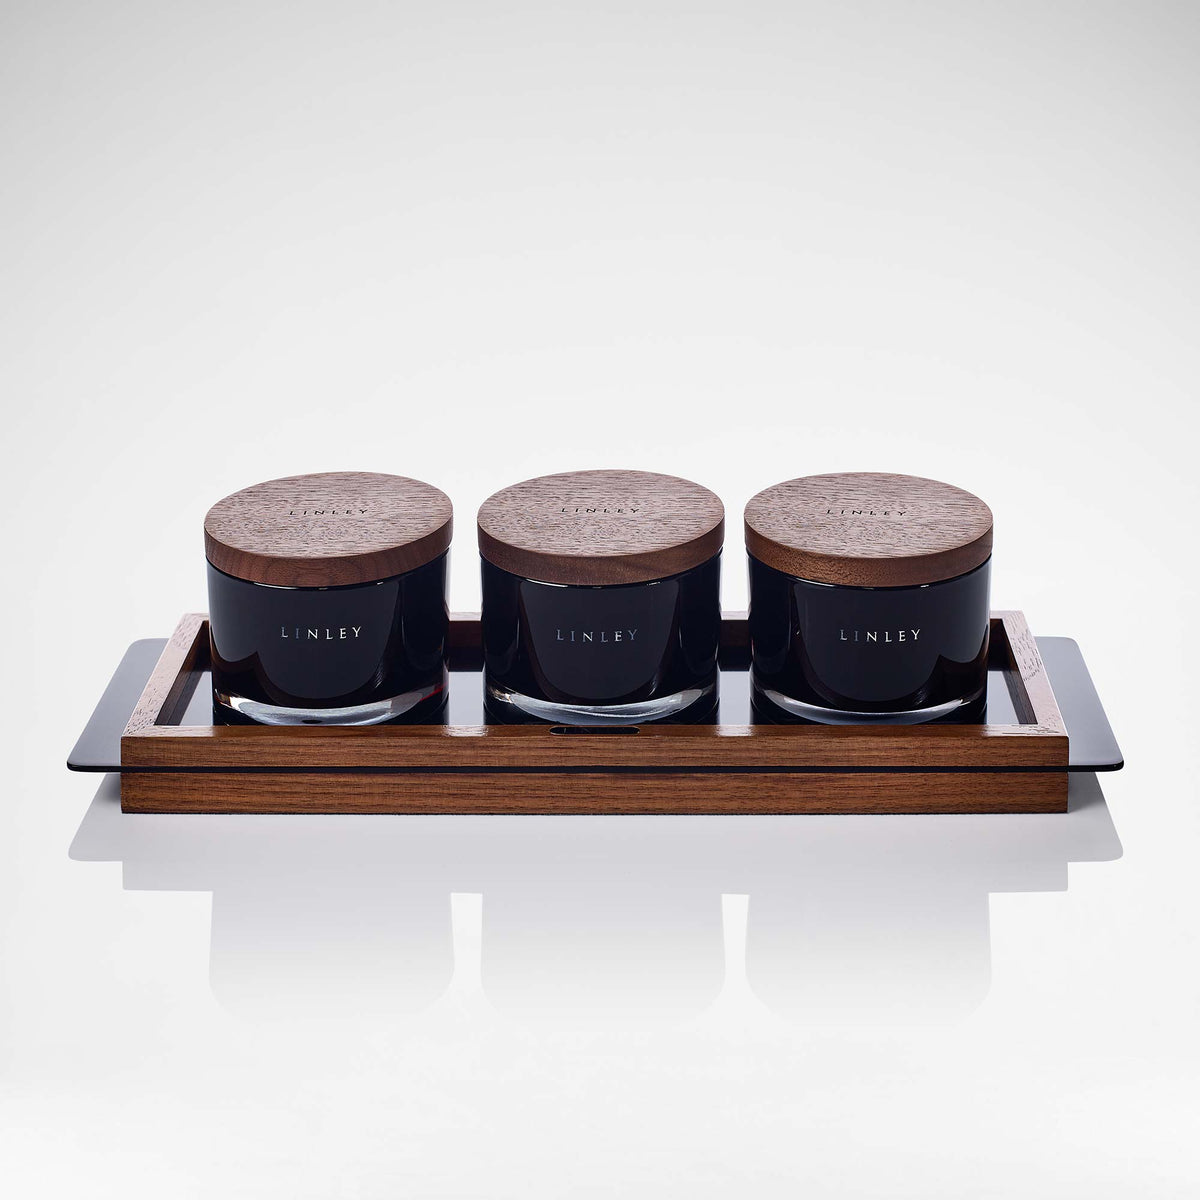 Walnut Tray | Luxury Home Accessories & Gifts | LINLEY